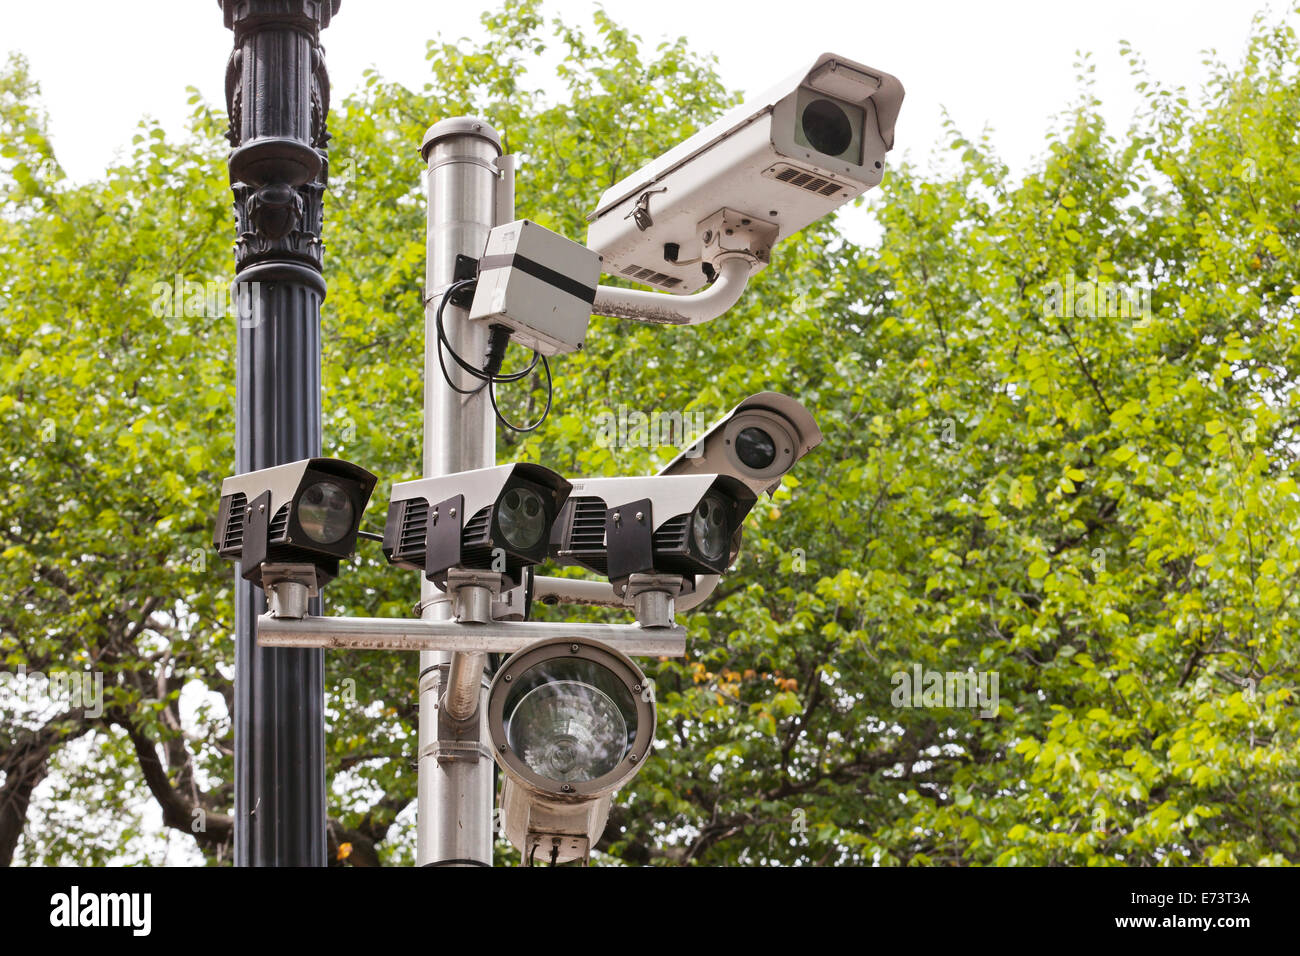 Traffic and automatic car license plate number recognition cameras - Washington, DC USA Stock Photo